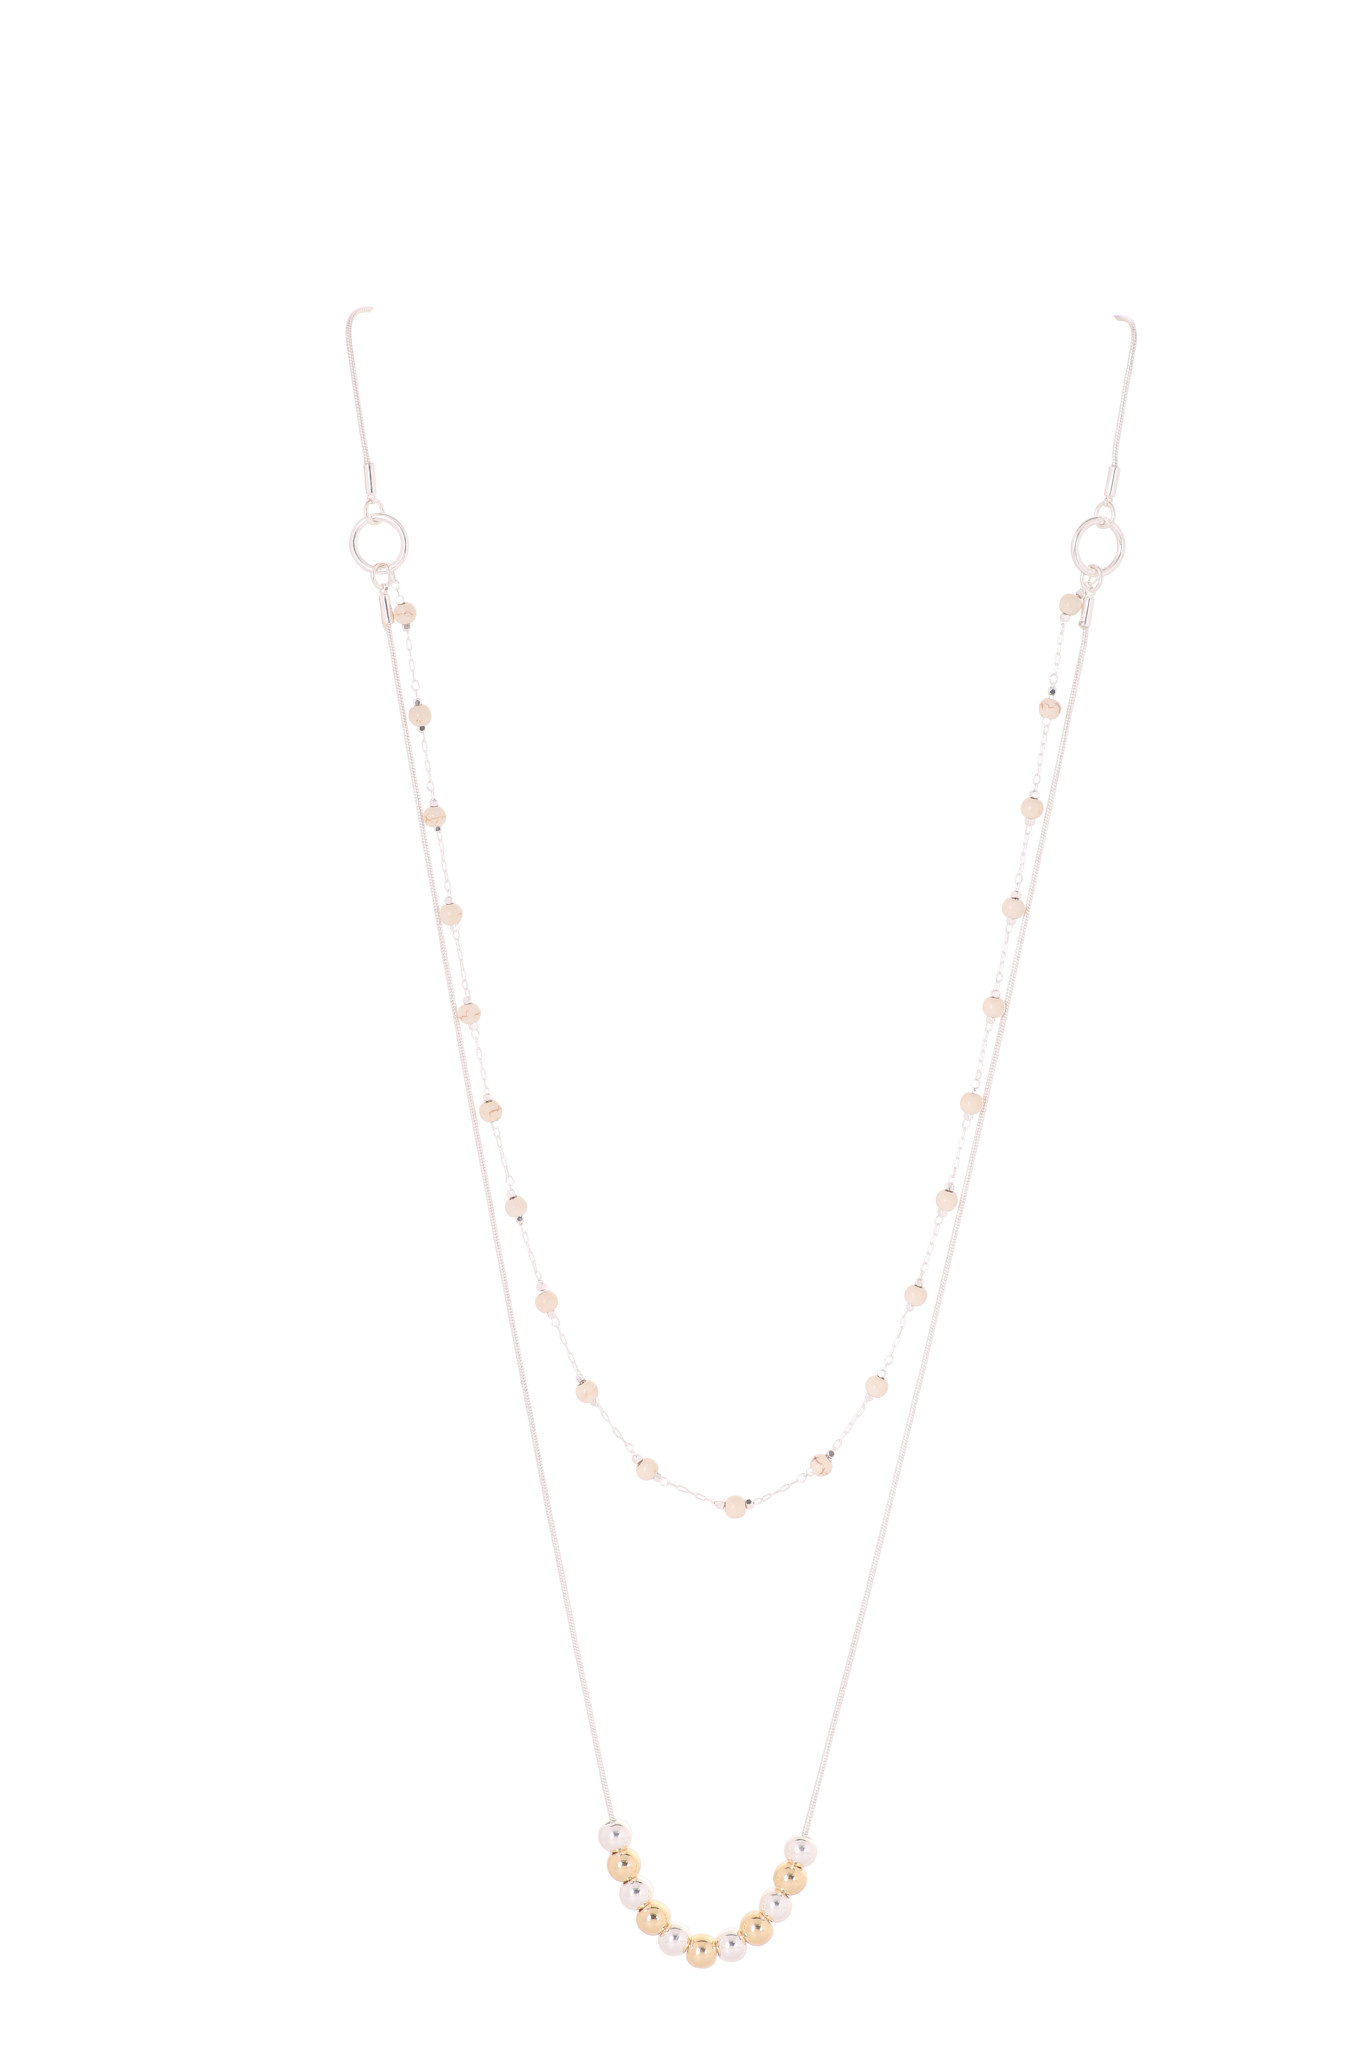 Long Chain with Metal Beads and Small Stones